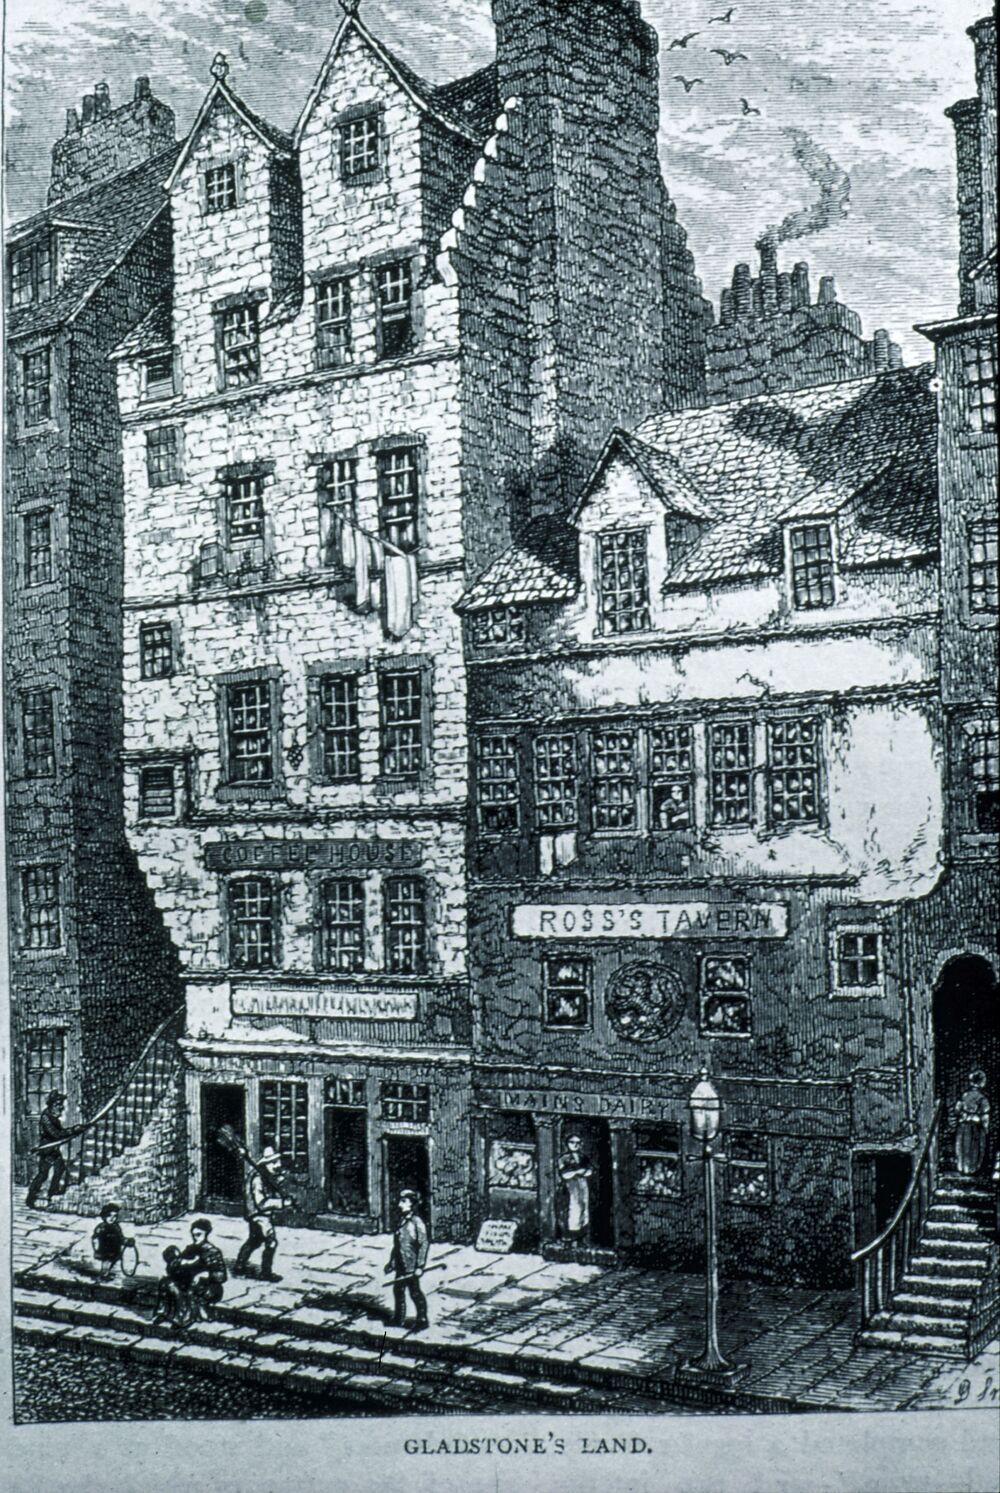 A black and white line drawing of an Old Town tenement in Edinburgh. It has six storeys above the street. Beside it stands a 4-storey building named Ross's Tavern. Several men walk along the pavement in front, or sit on the stone steps.